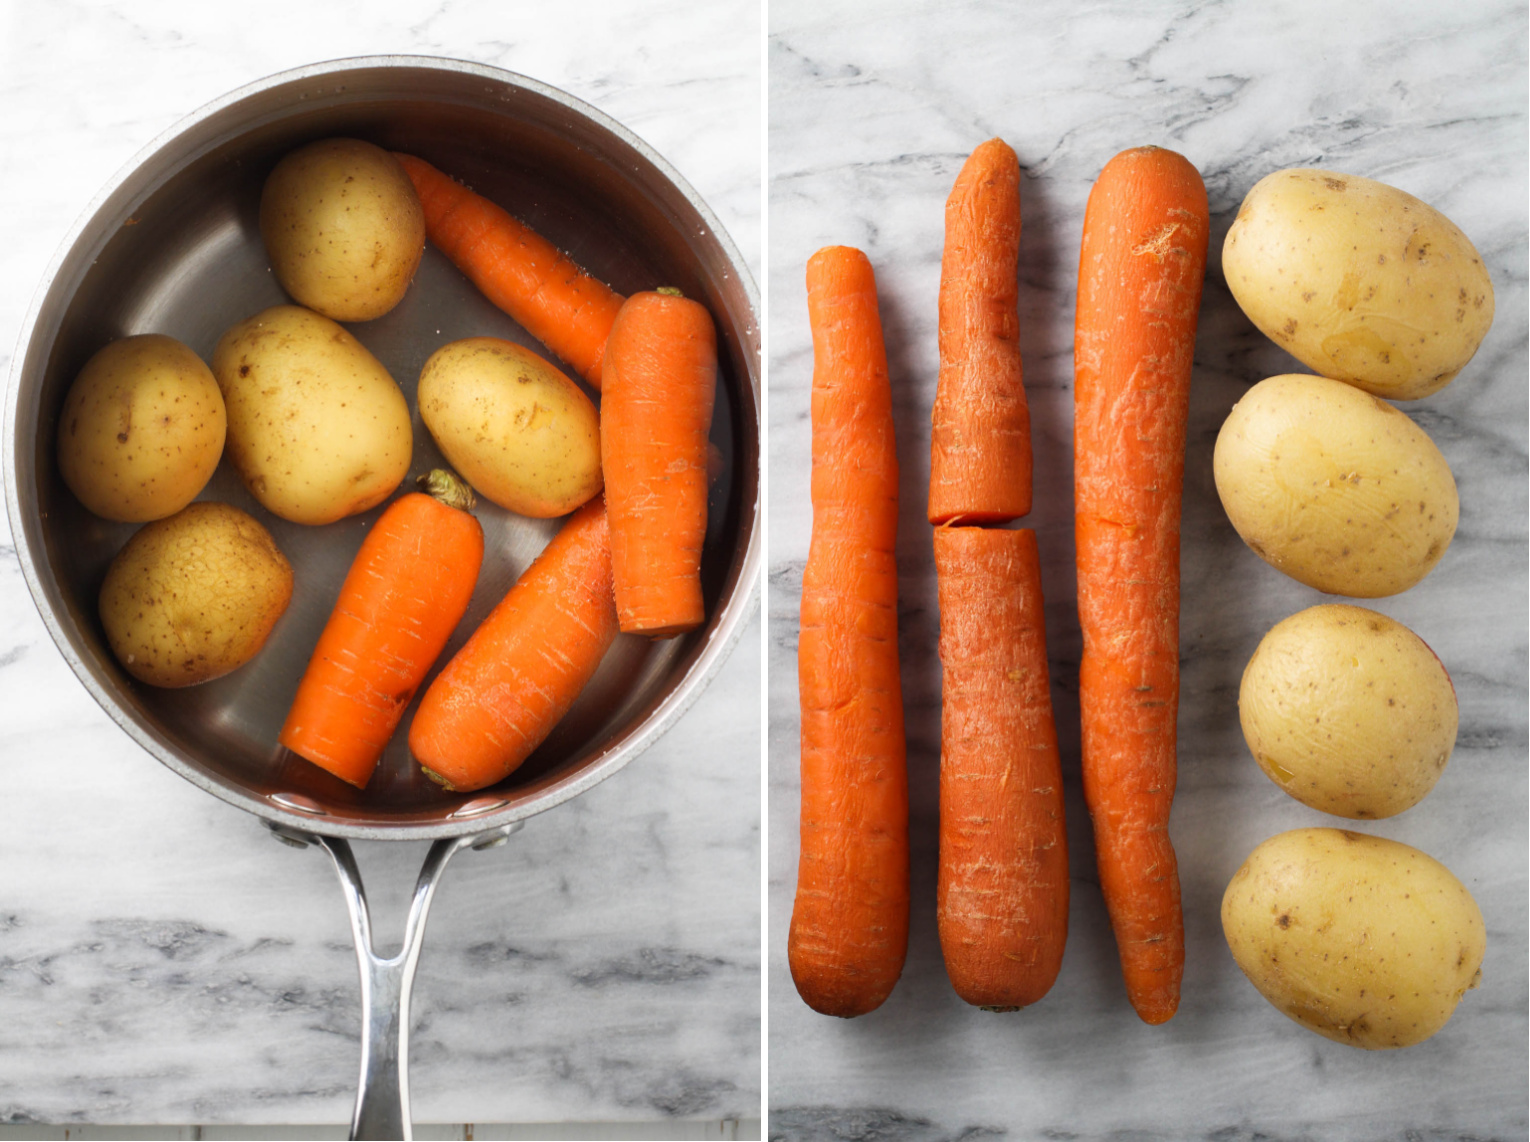 Two side-by-side images. On the left image, potatoes and carrots with water in a pot. On the right image, cooked potatoes and carrots.